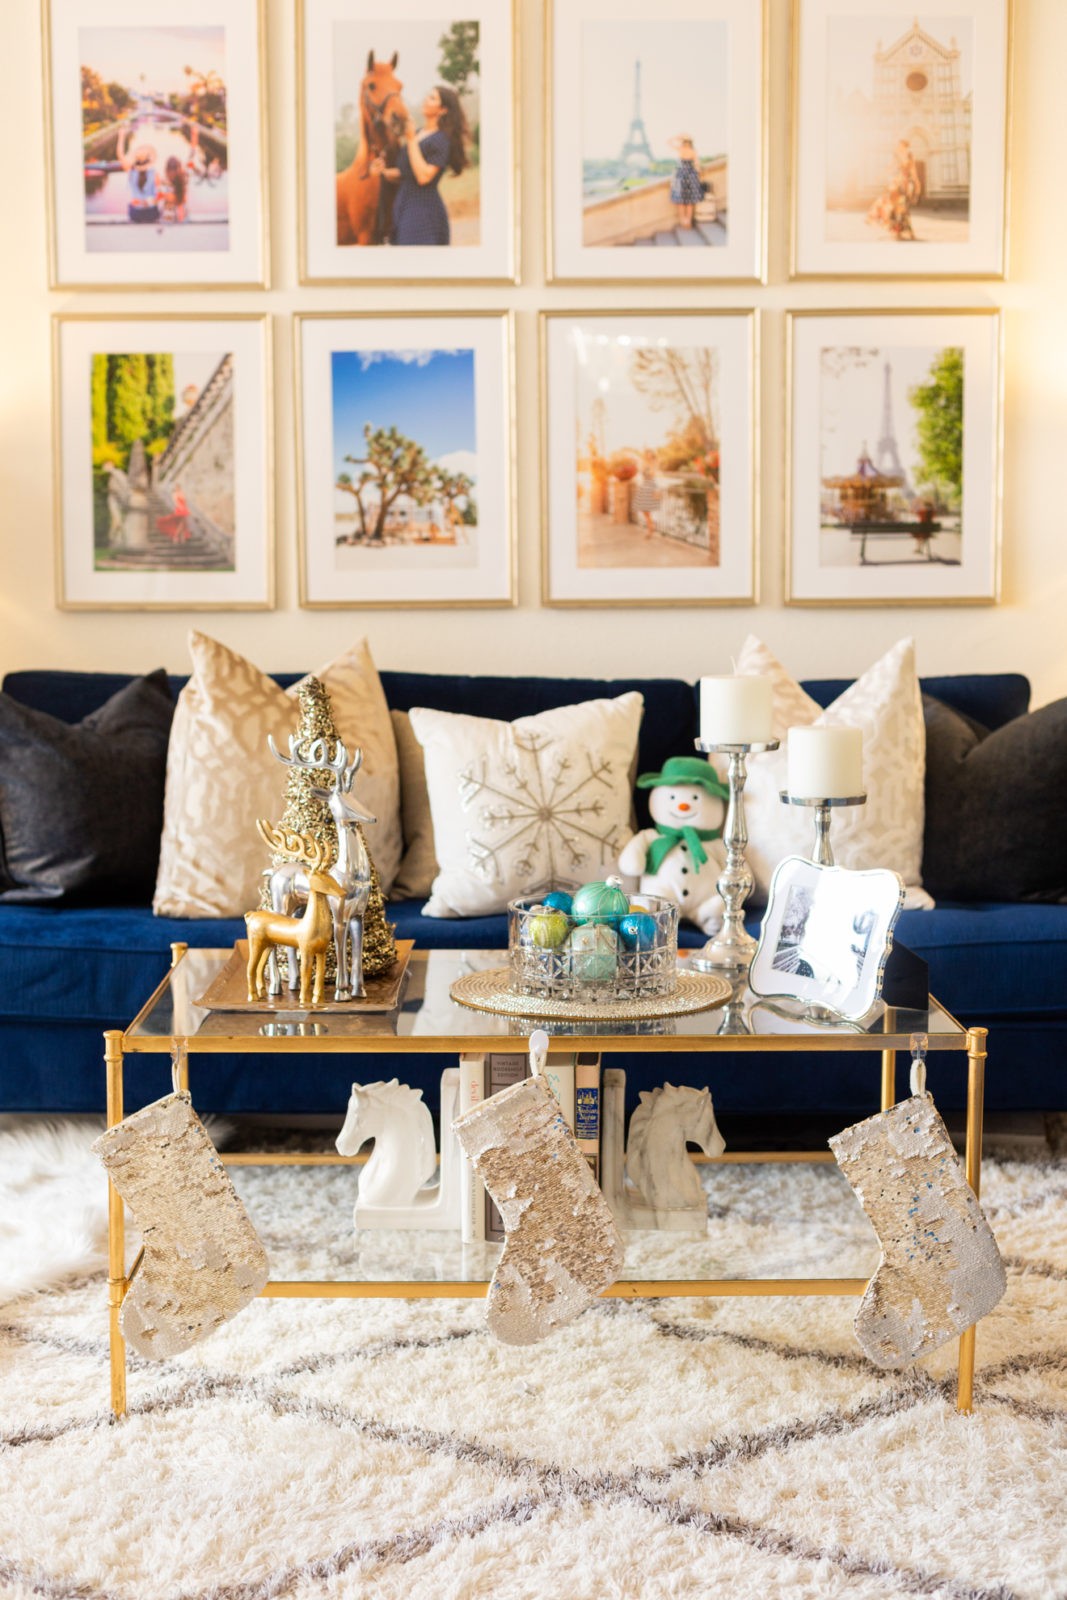 Holiday Home Decor by Home Decor Blogger Laura Lily | Holiday Home Decor 2019 by popular Los Angeles life and style blogger, Laura Lily: image of a living room decorated with Home Goods horse book ends and candle sticks, Target sequin stockings, RugsUSA rug,  Framebridge picture frames, Target and Z Gallerie throw pillows and Safavieh Aslan Antique Gold Leaf Coffee Table.